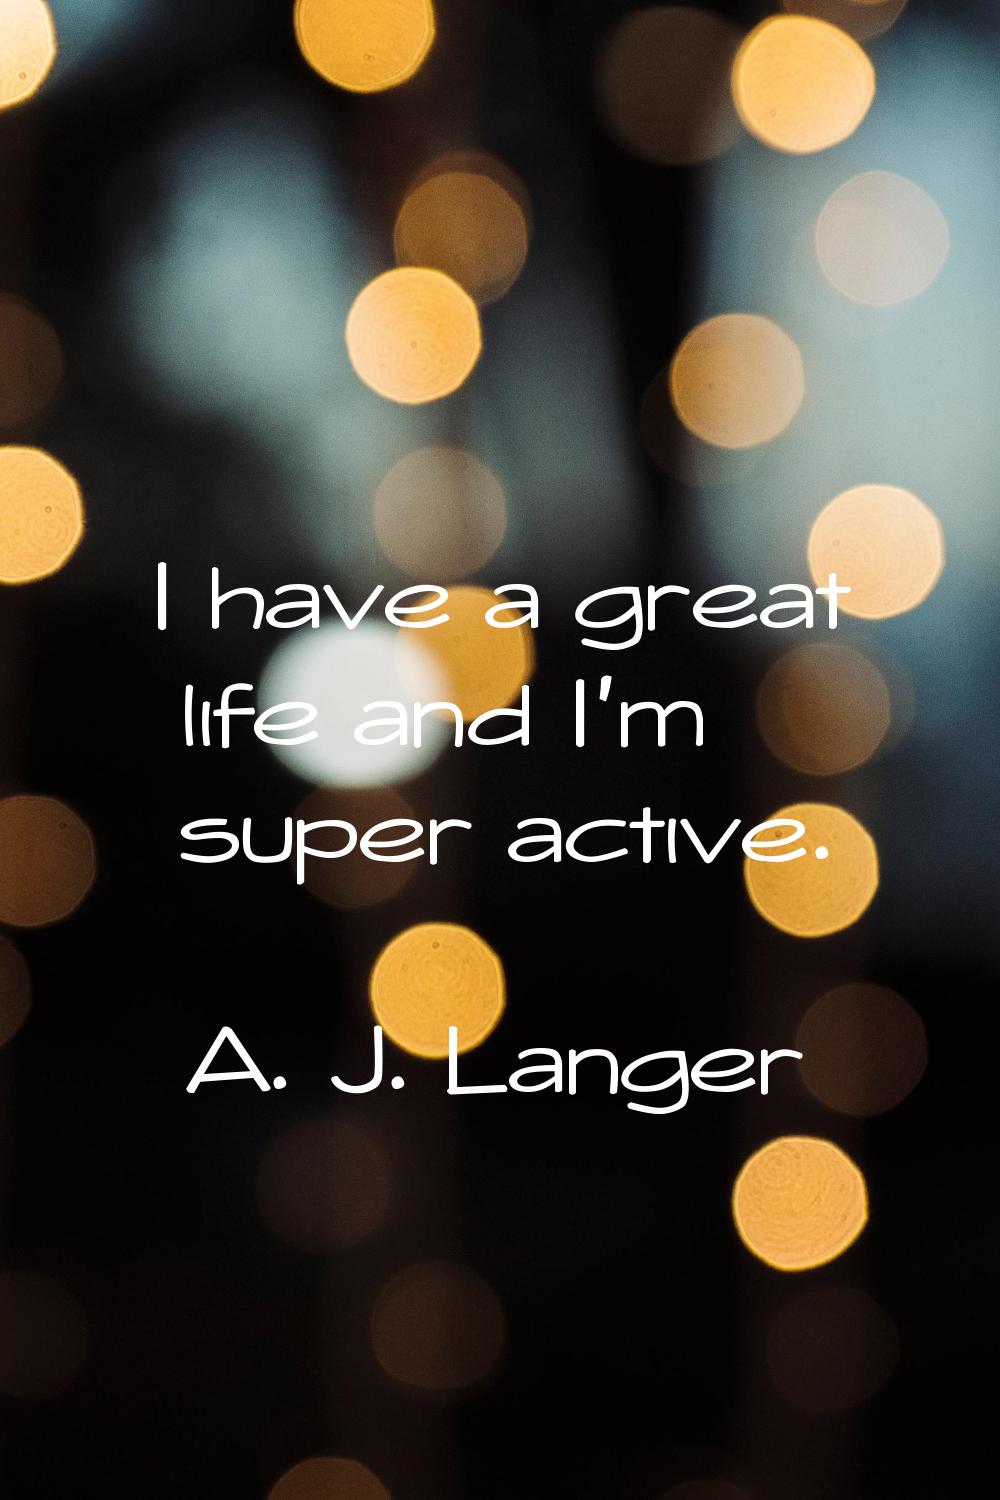 I have a great life and I'm super active.